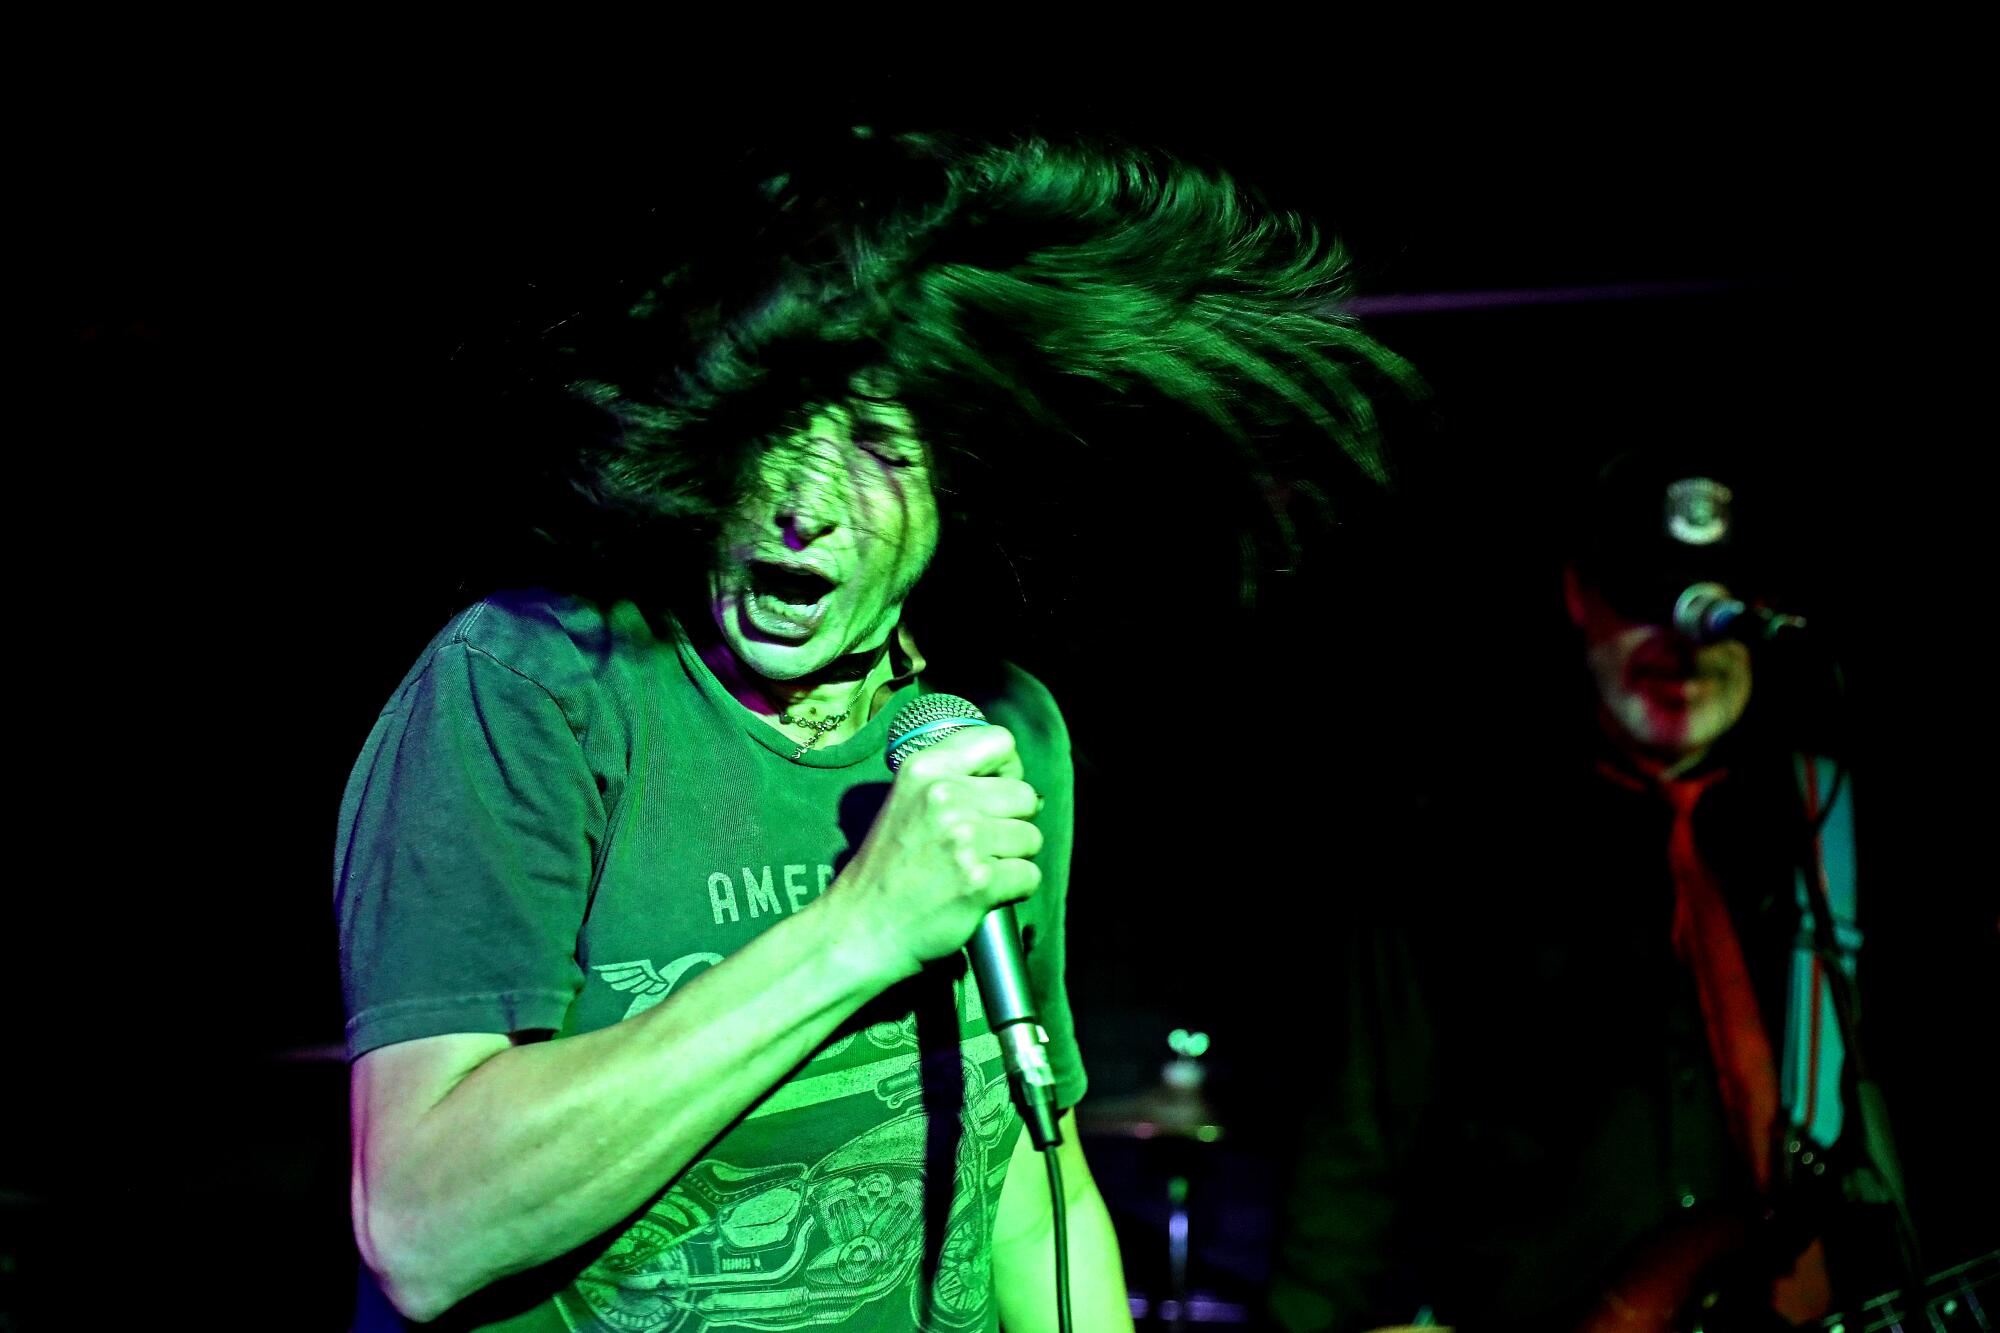 A person sings on stage, with hair flying